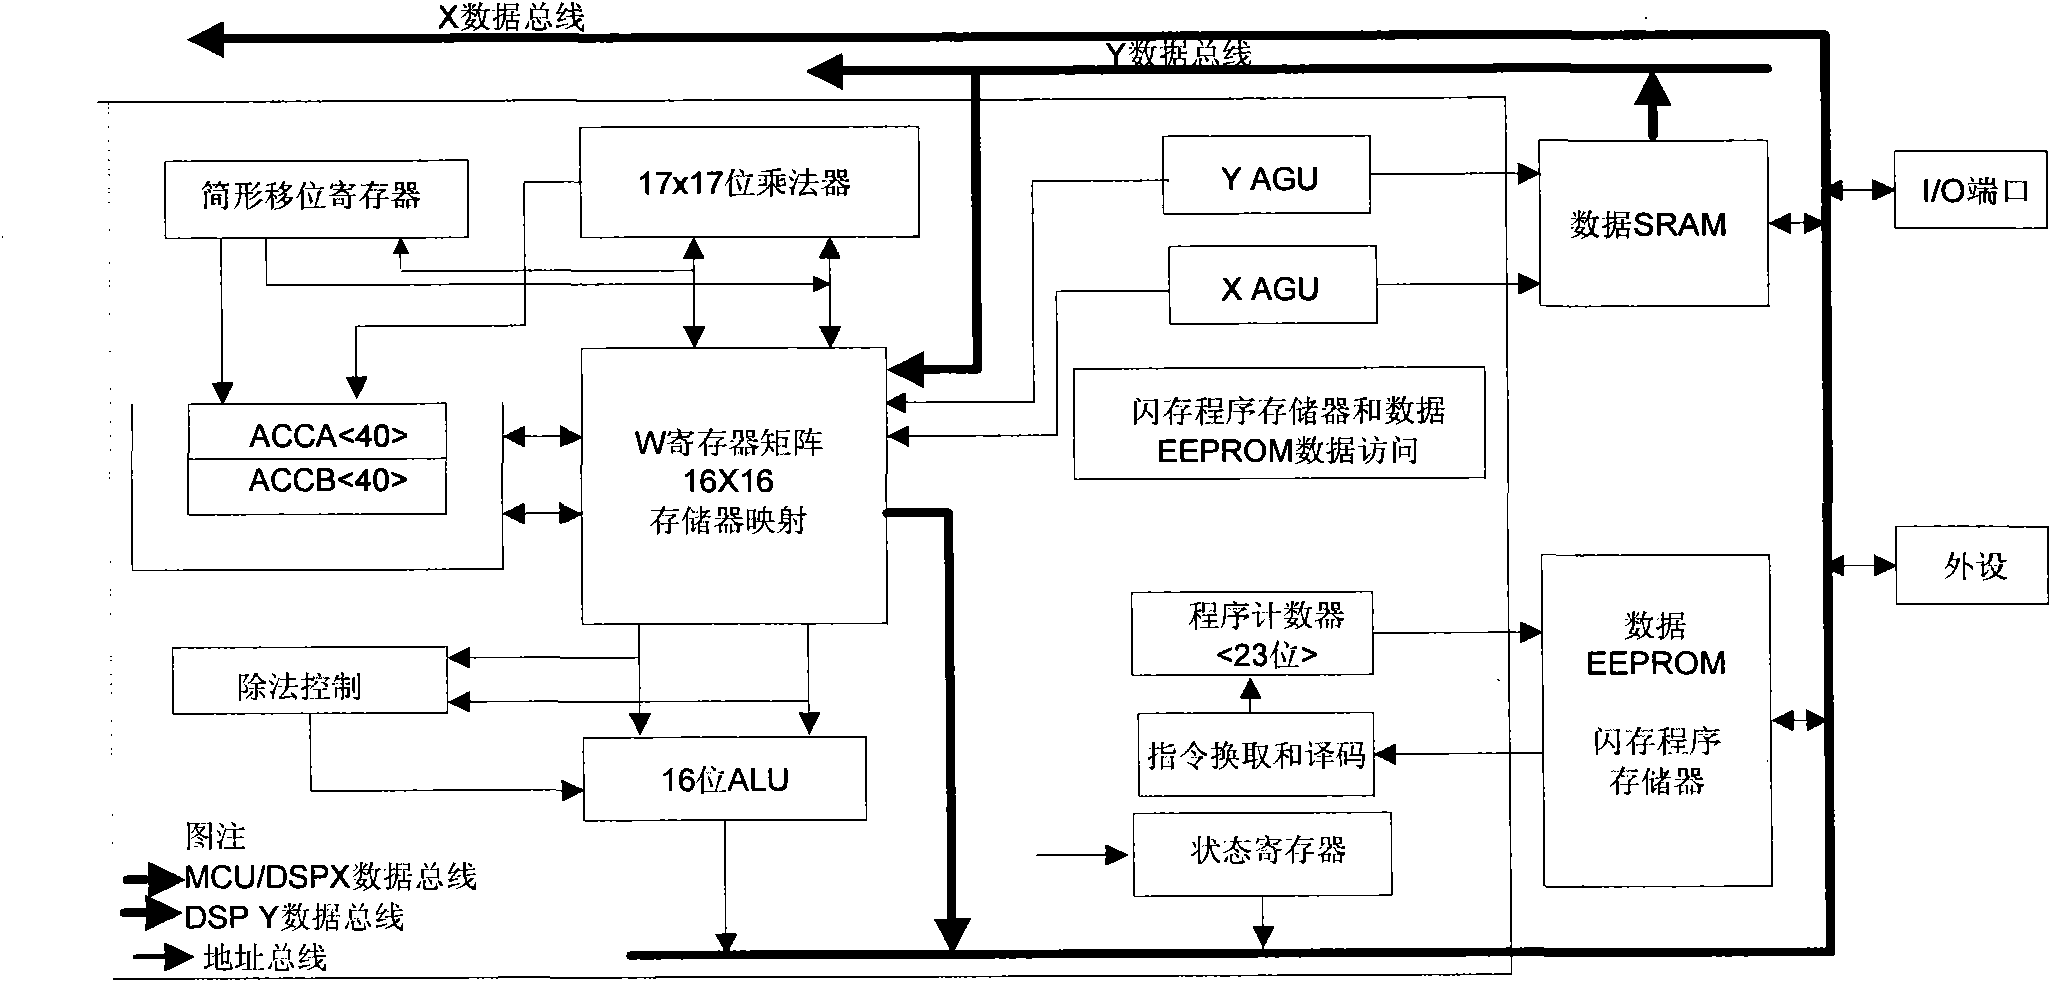 Singlechip-based induction motor variable frequency speed regulation control system